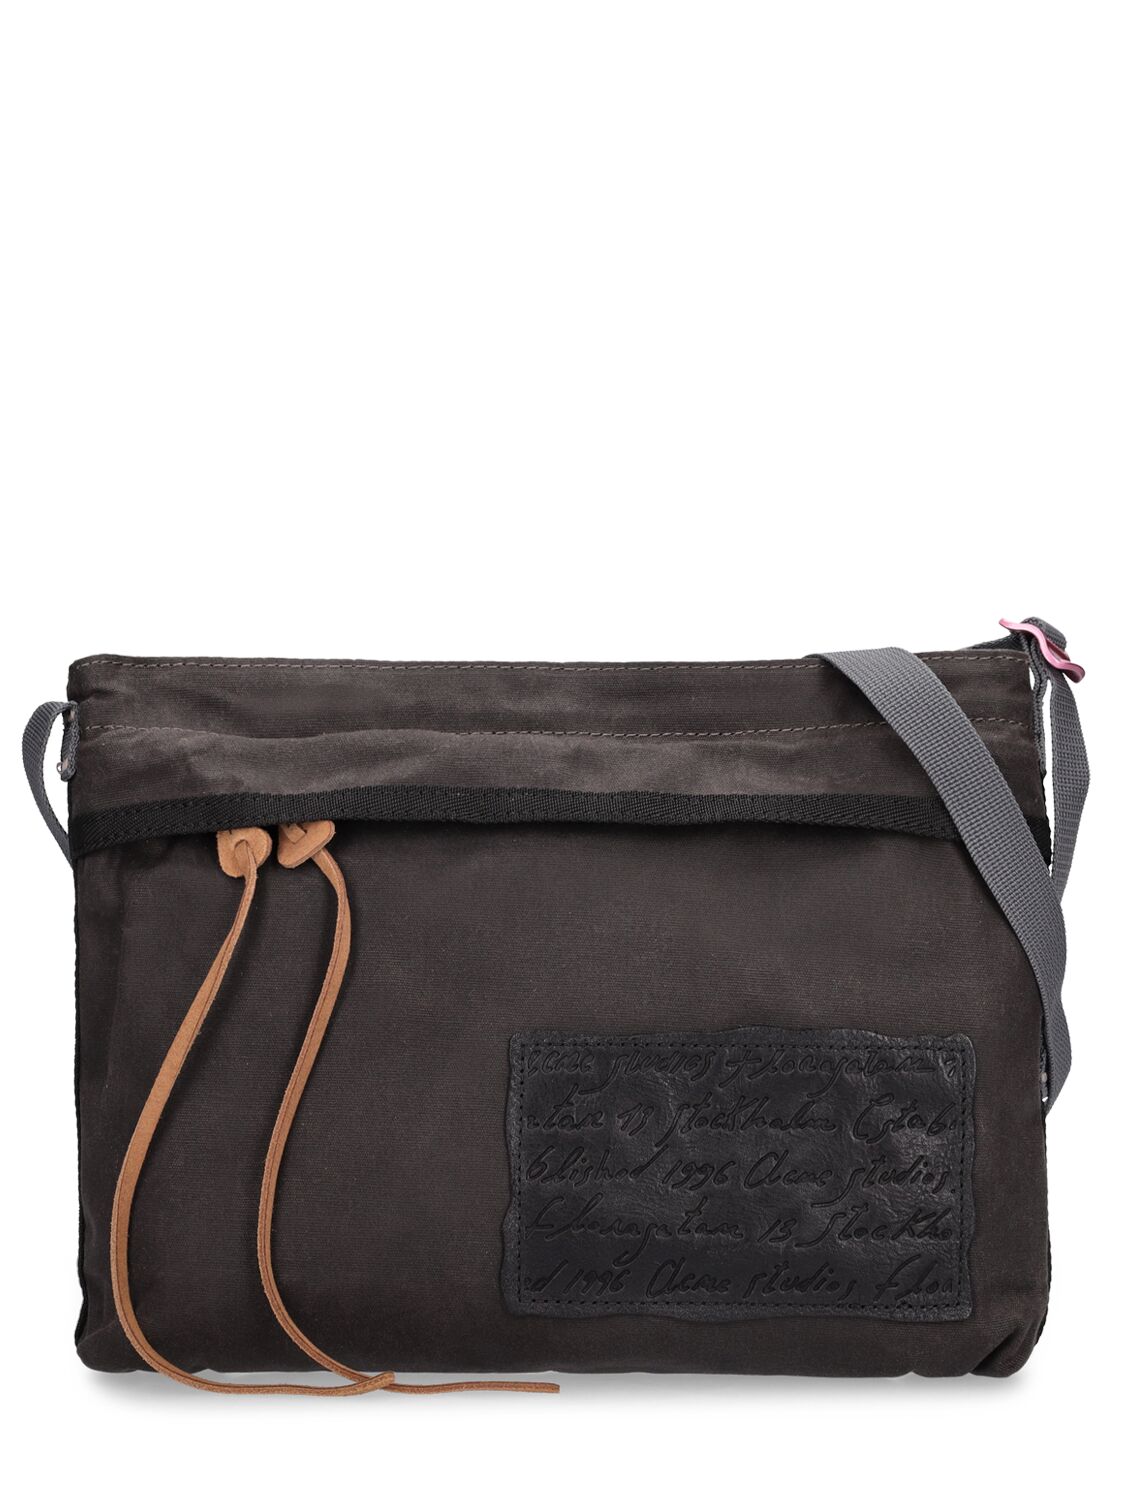 Image of Andemer Waxed Mini Canvas Messenger Bag